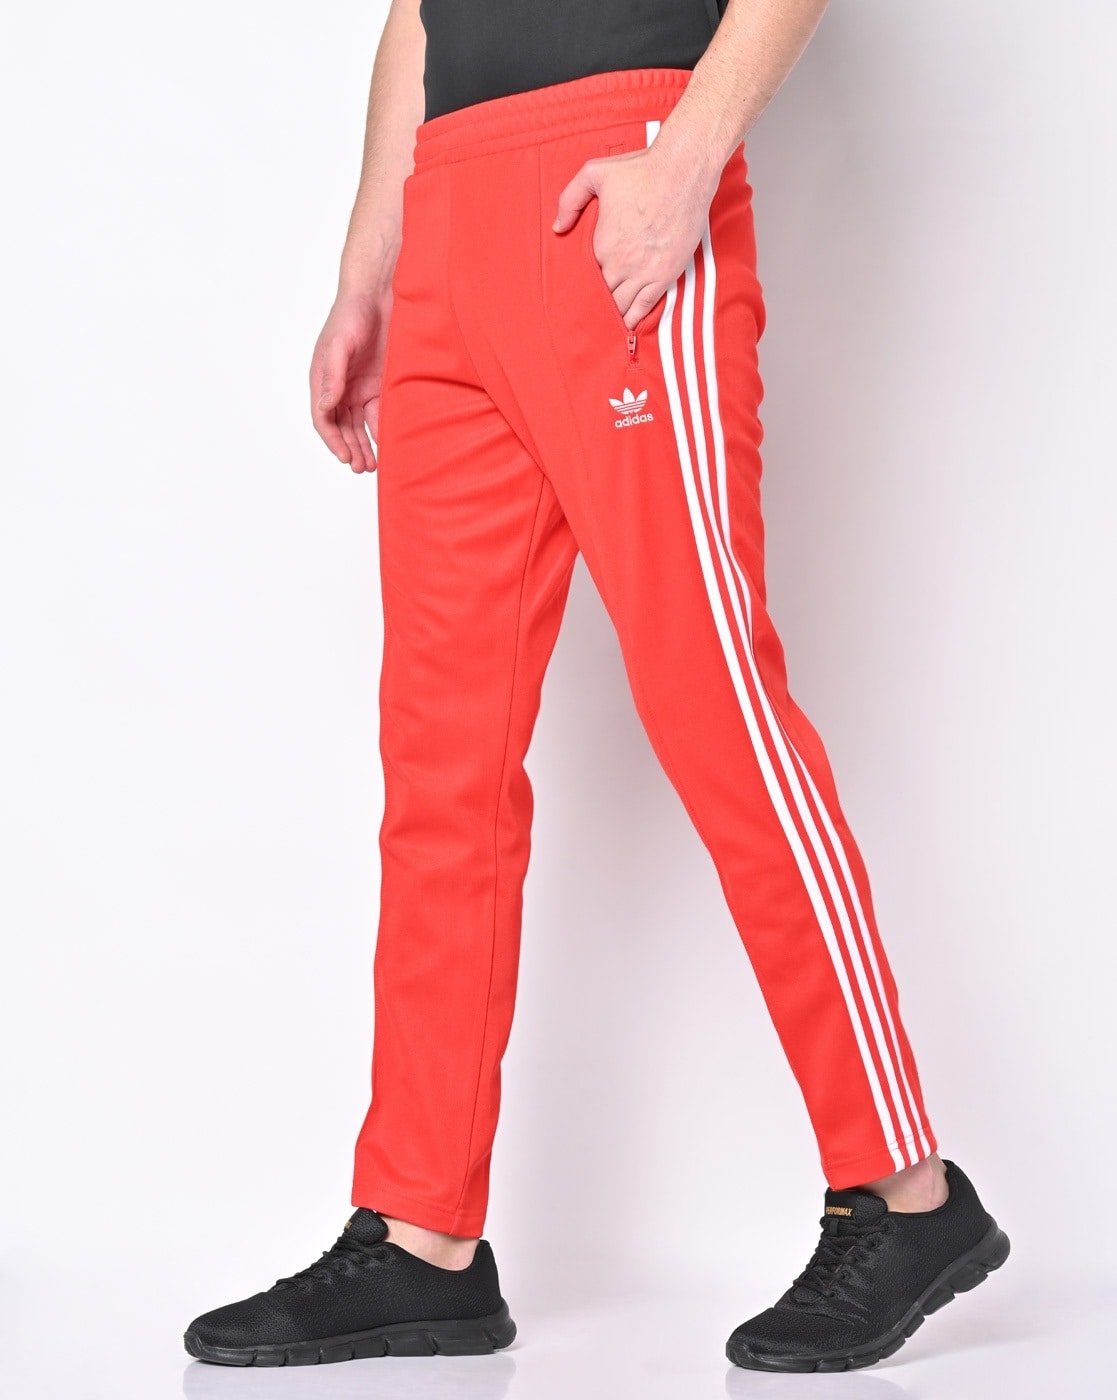 Adidas GF0208 Mens Originals Adicolor Classics Primeblue SST Track Pants  Scarlet White in Ahmedabad at best price by Euphoria Creation  Justdial